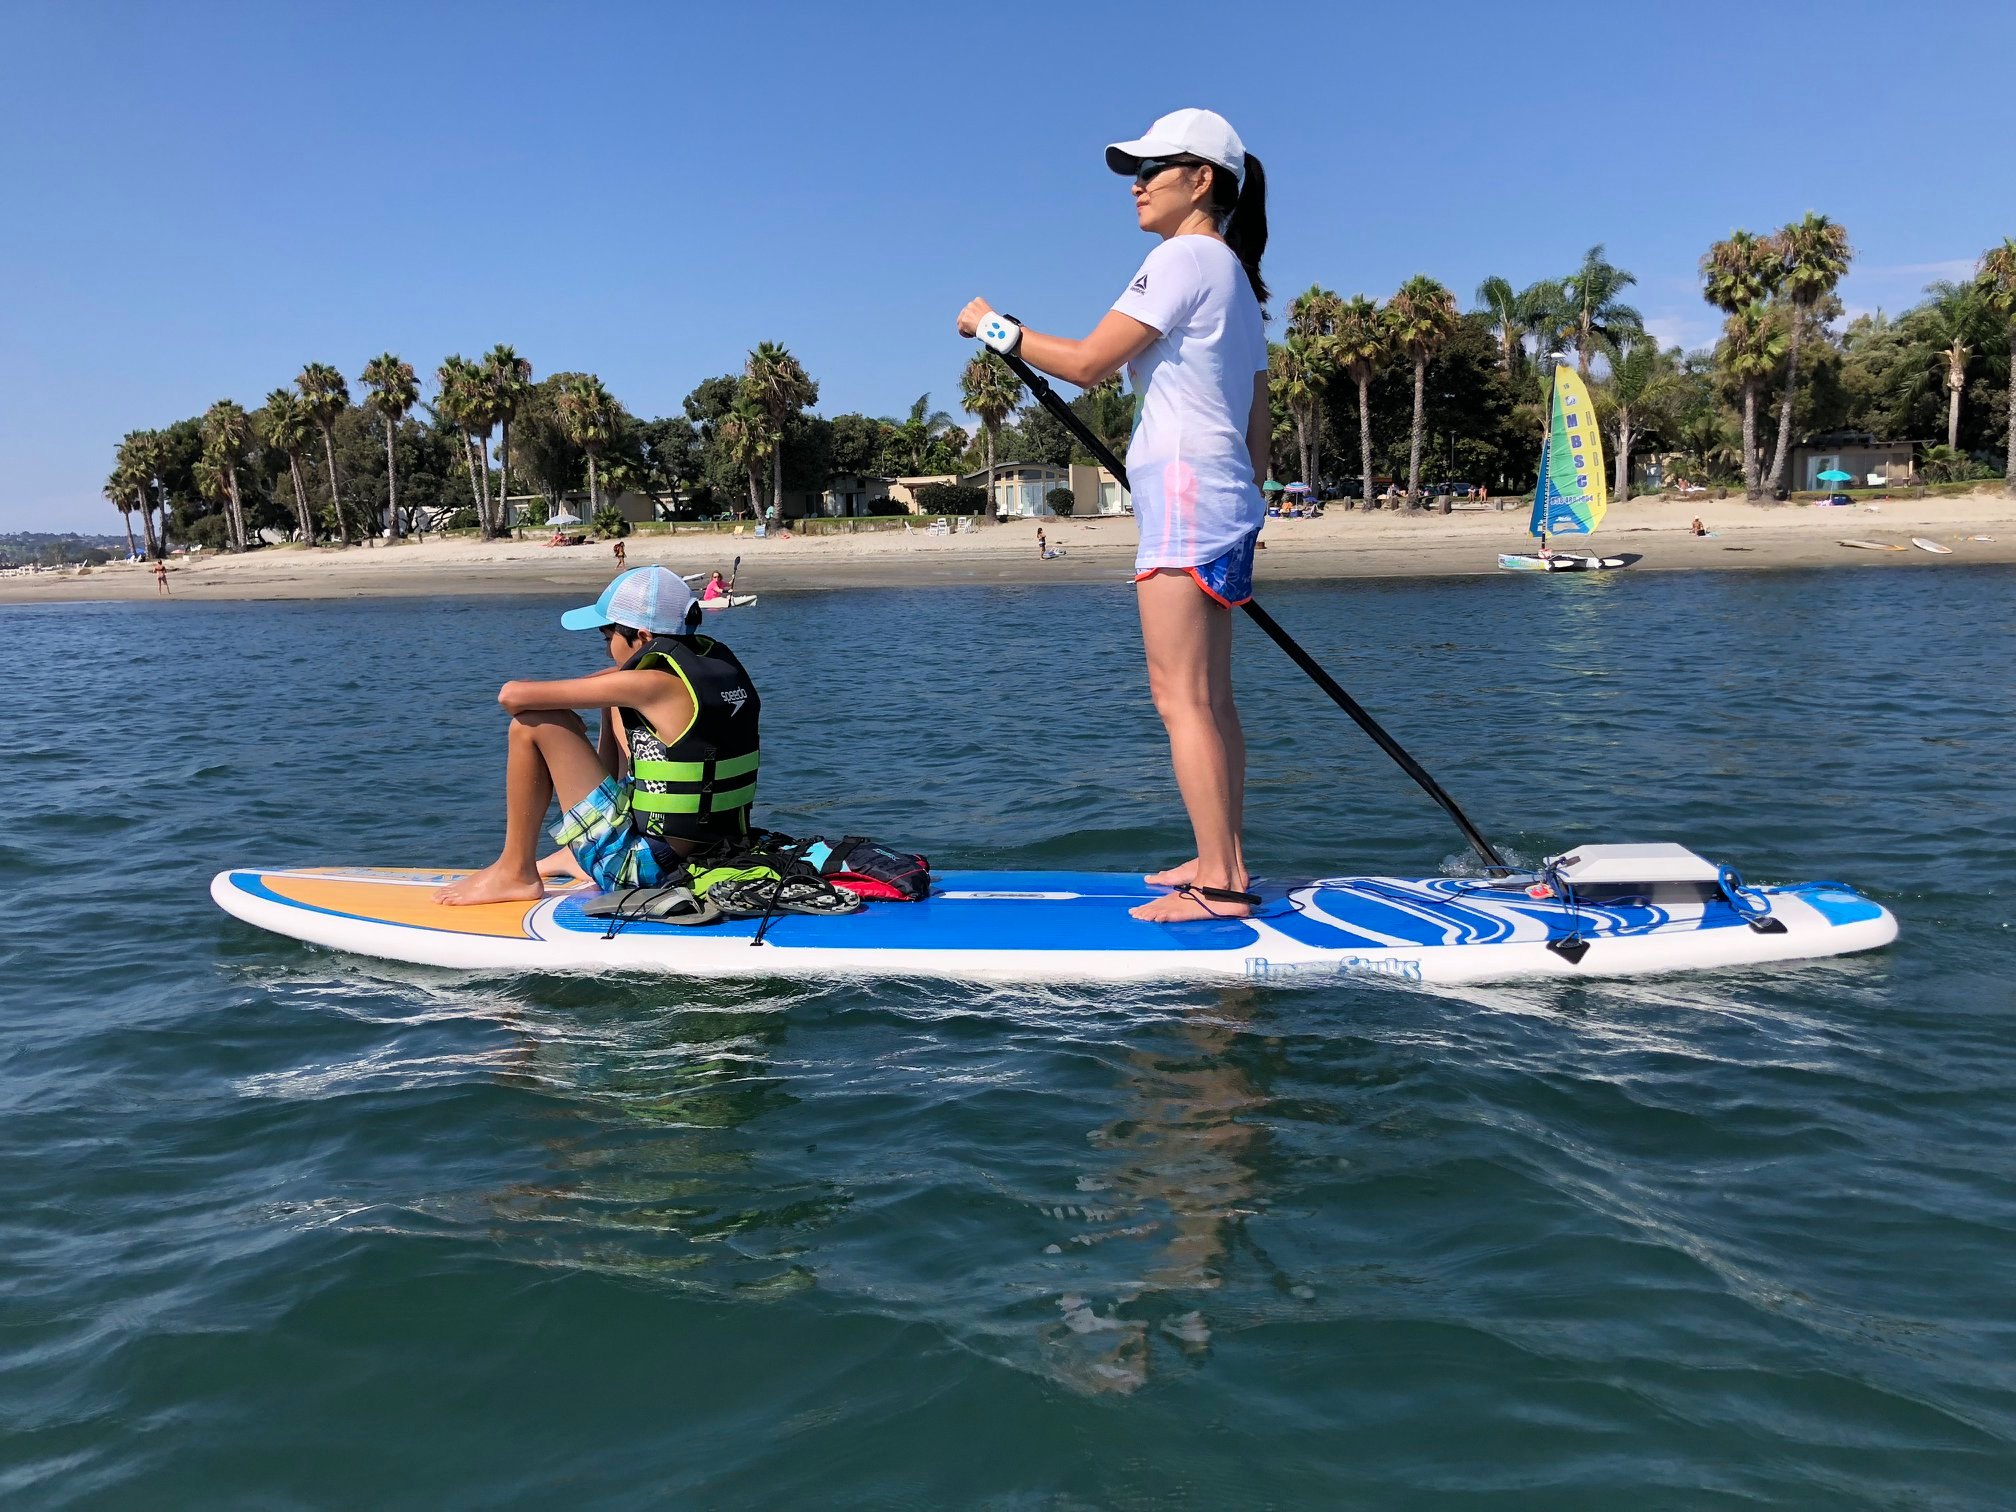 Mom and child paddleboarding together with Bixpy motor